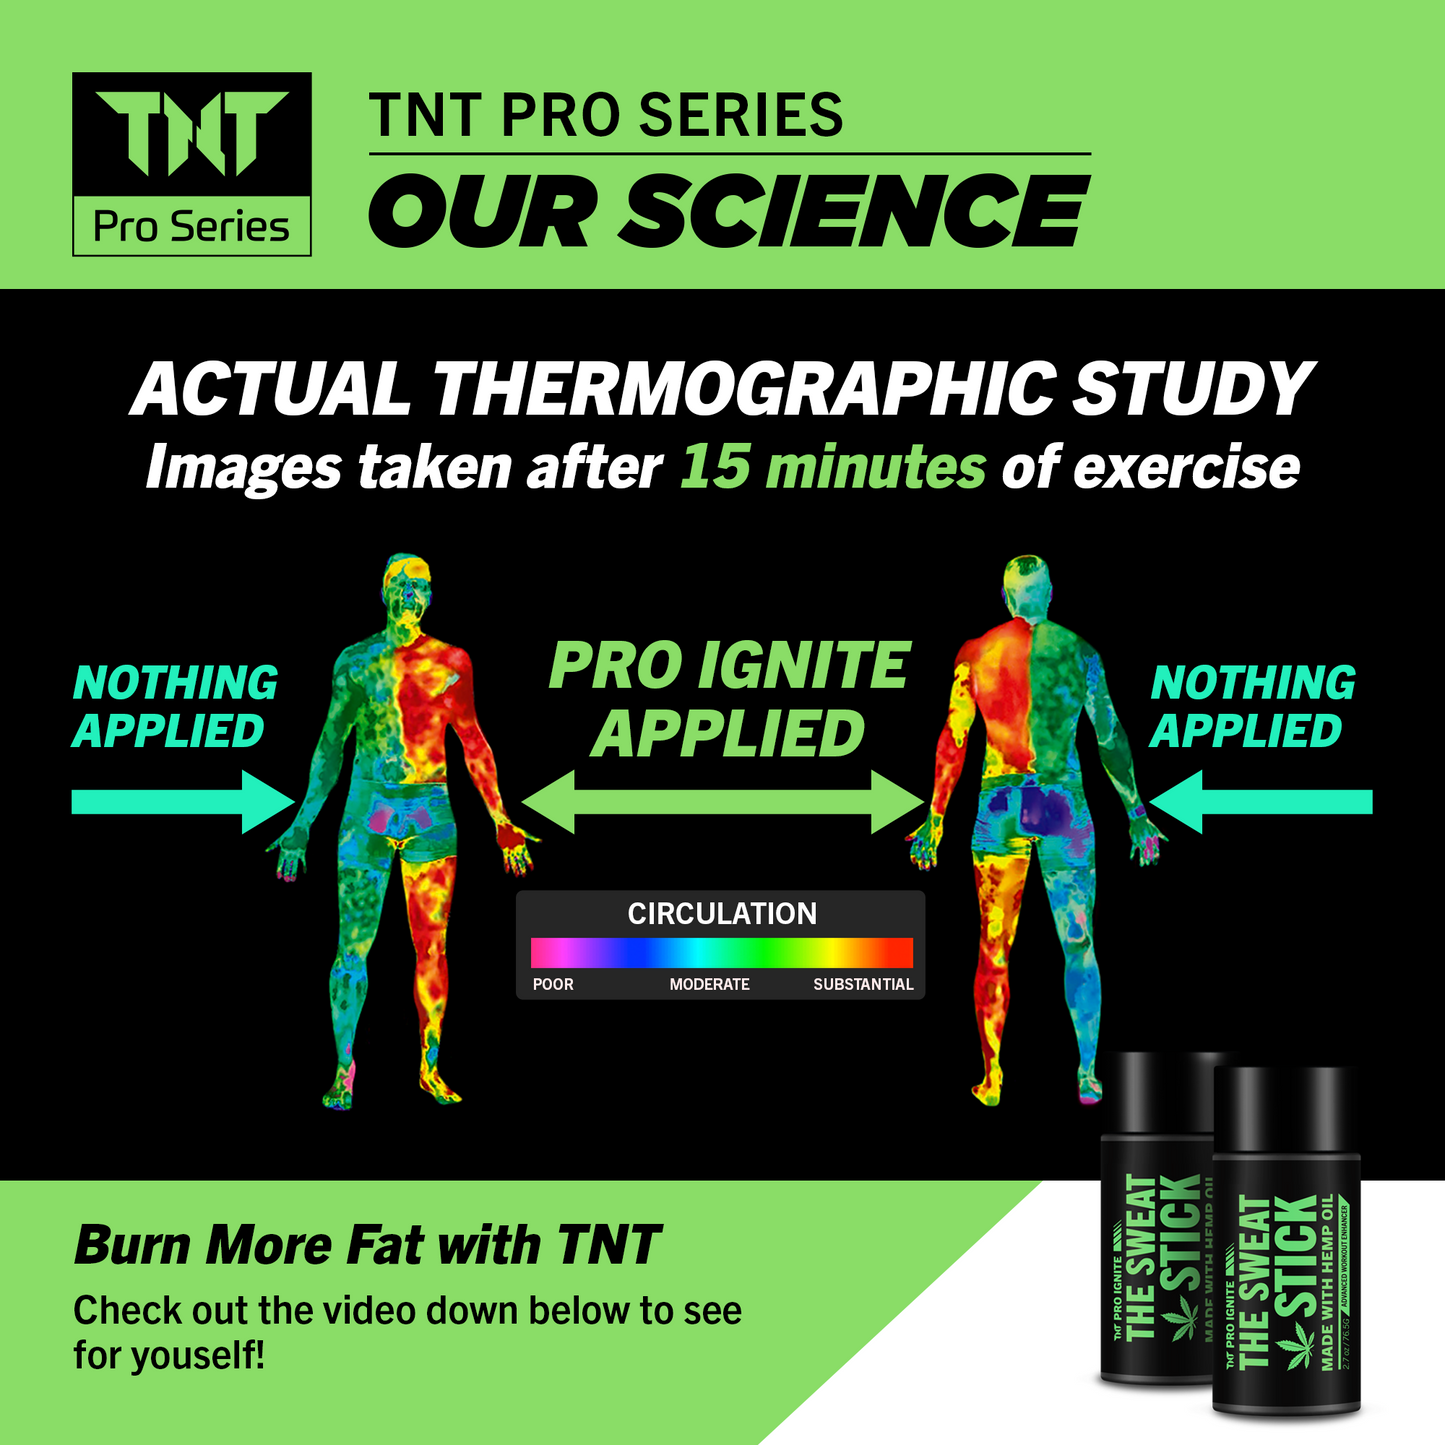 TNT Pro Ignite Hemp Sweat Stick for Men and Women – Thermogenic Weight Loss Workout Enhancer 2-Pack - TNT Pro Series